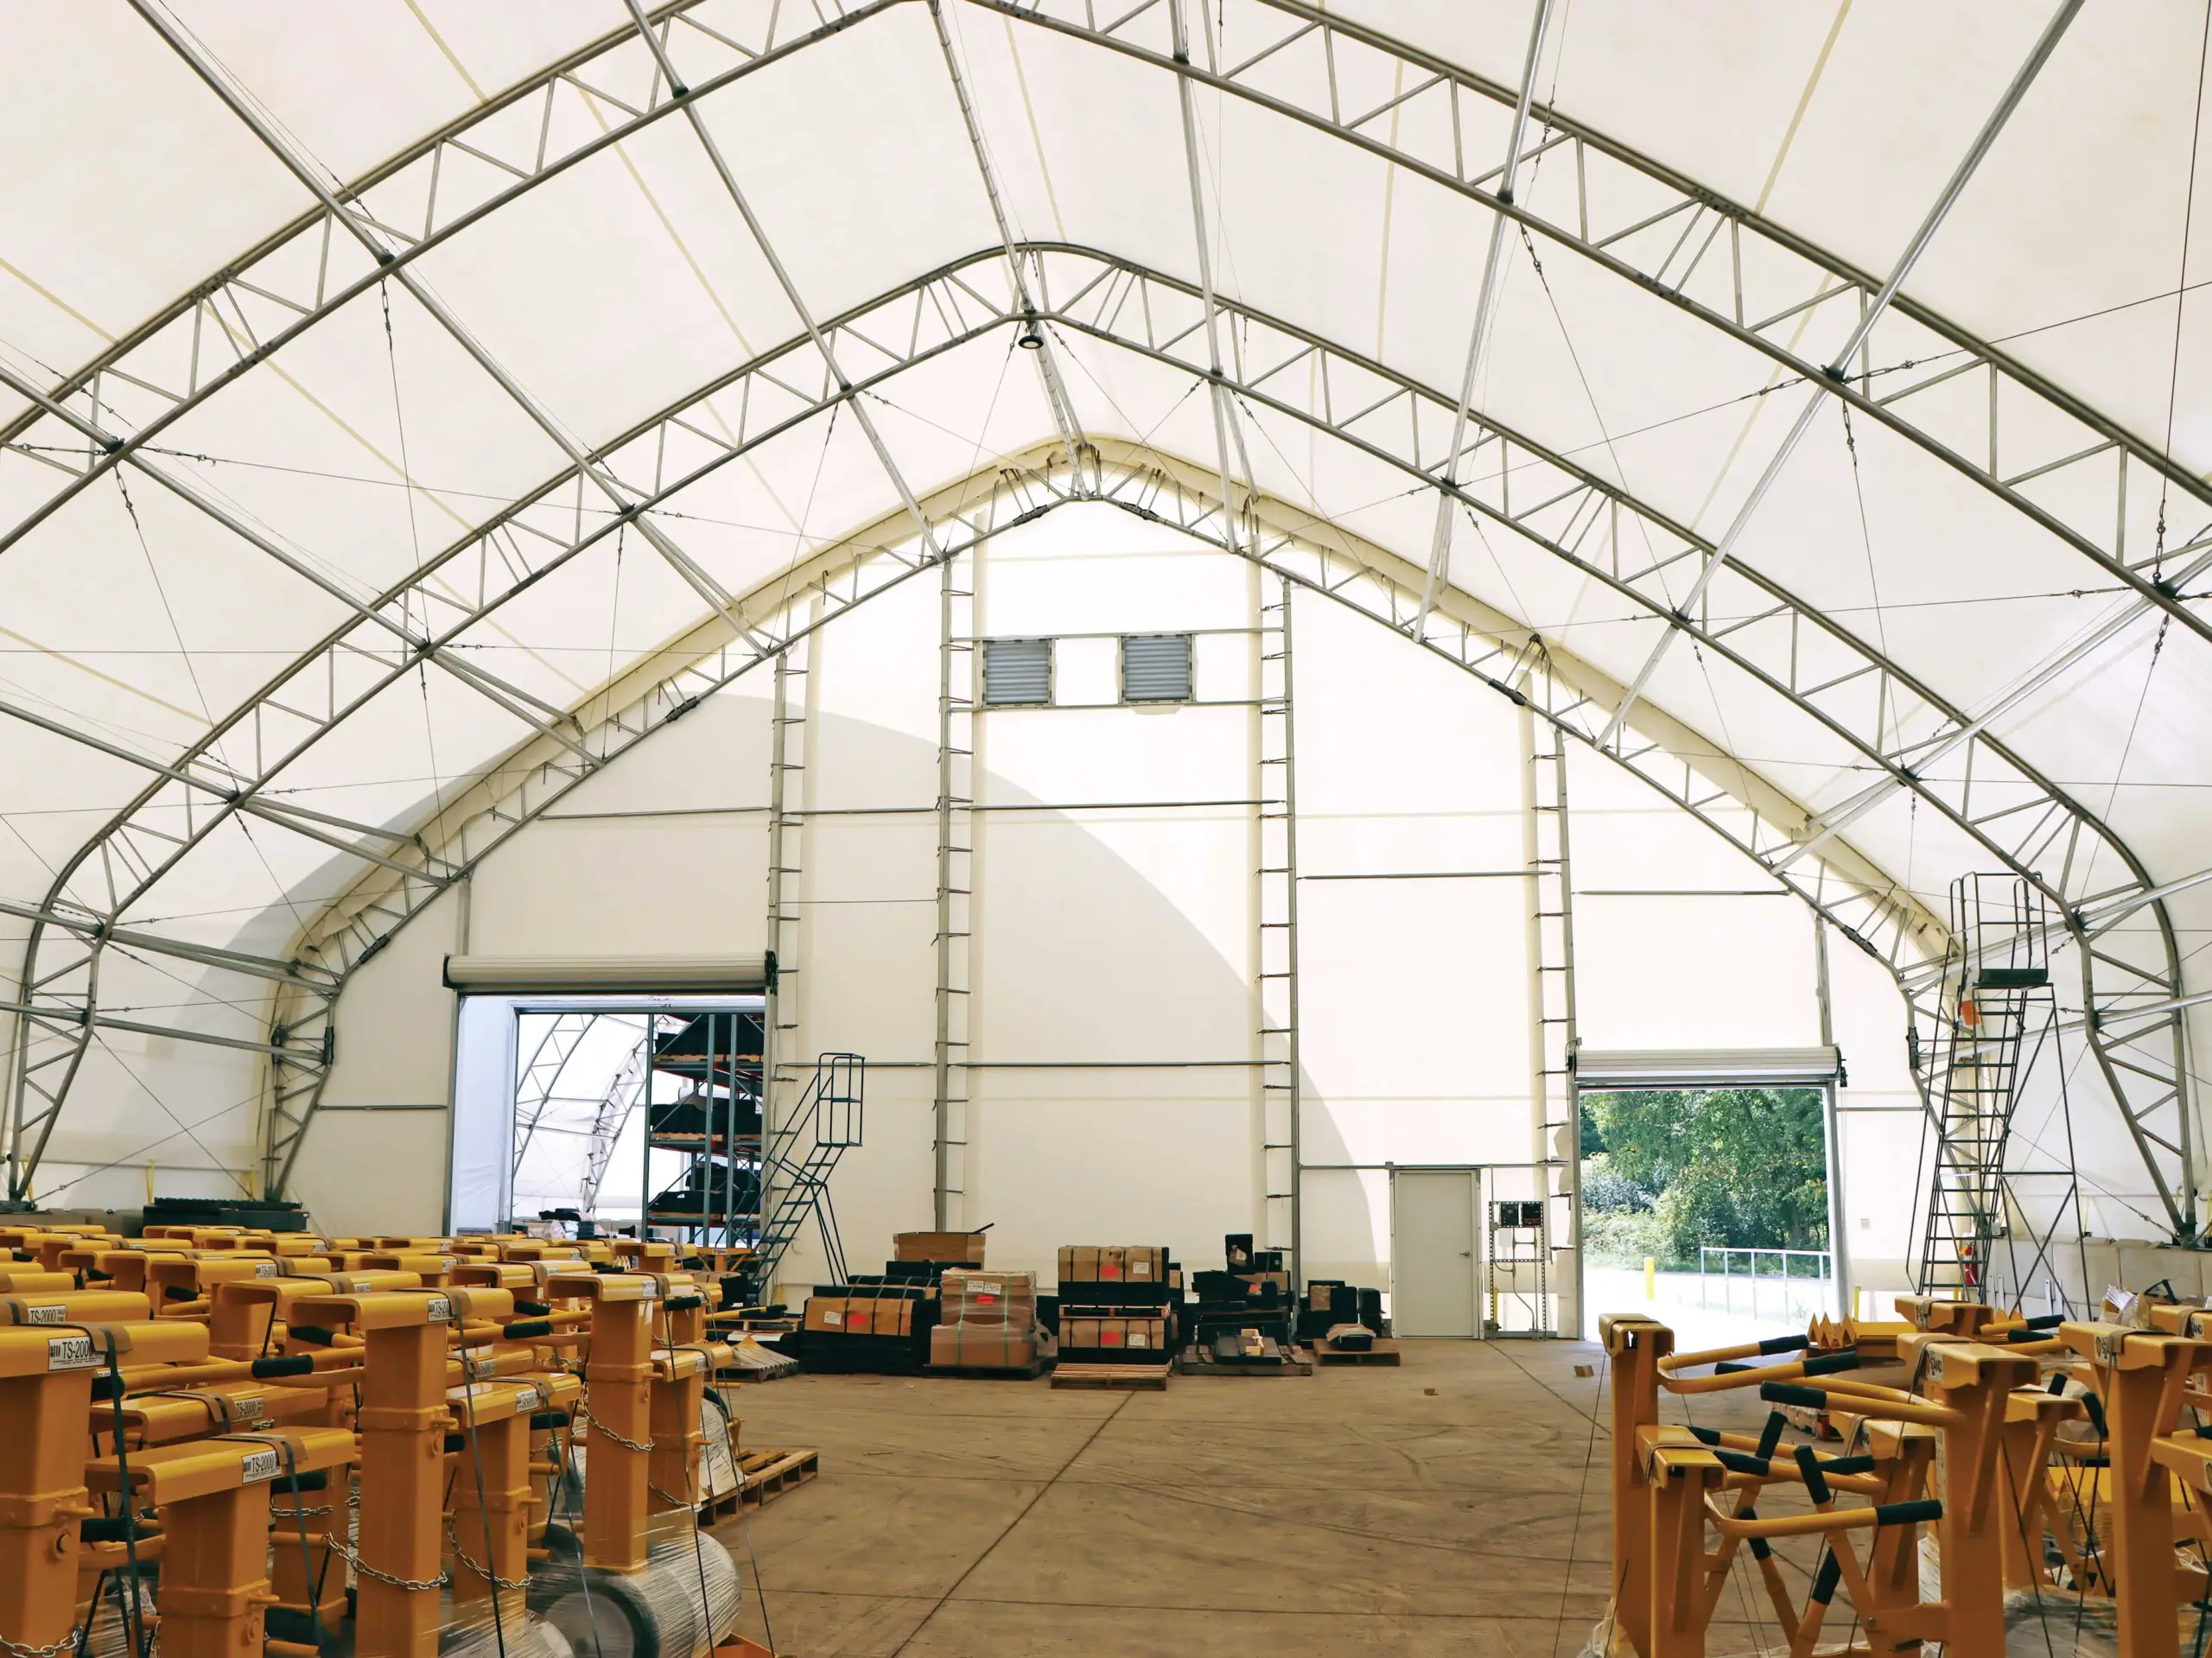 interior of a fabric warehouse building built with a truss frame